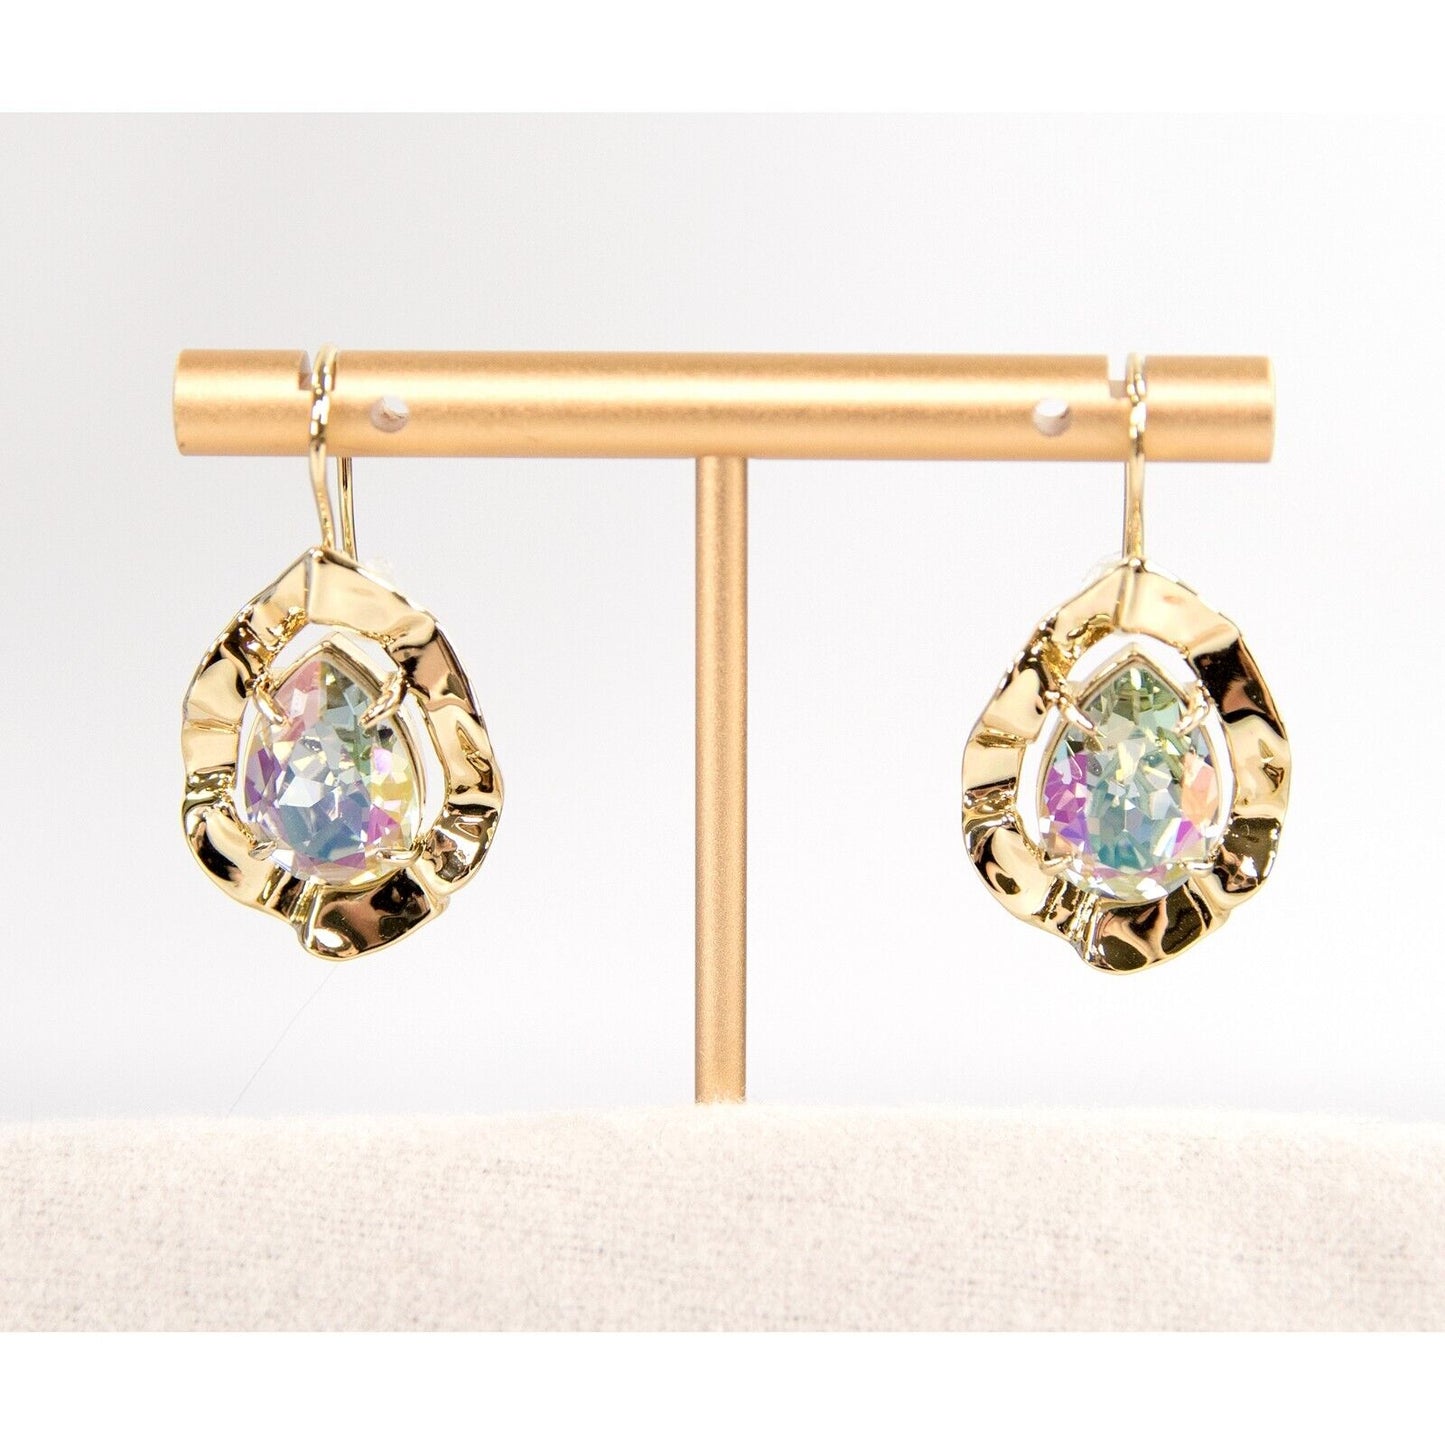 Alexis Bittar Crystal Ancient Coin Large Drop Earrings NWT